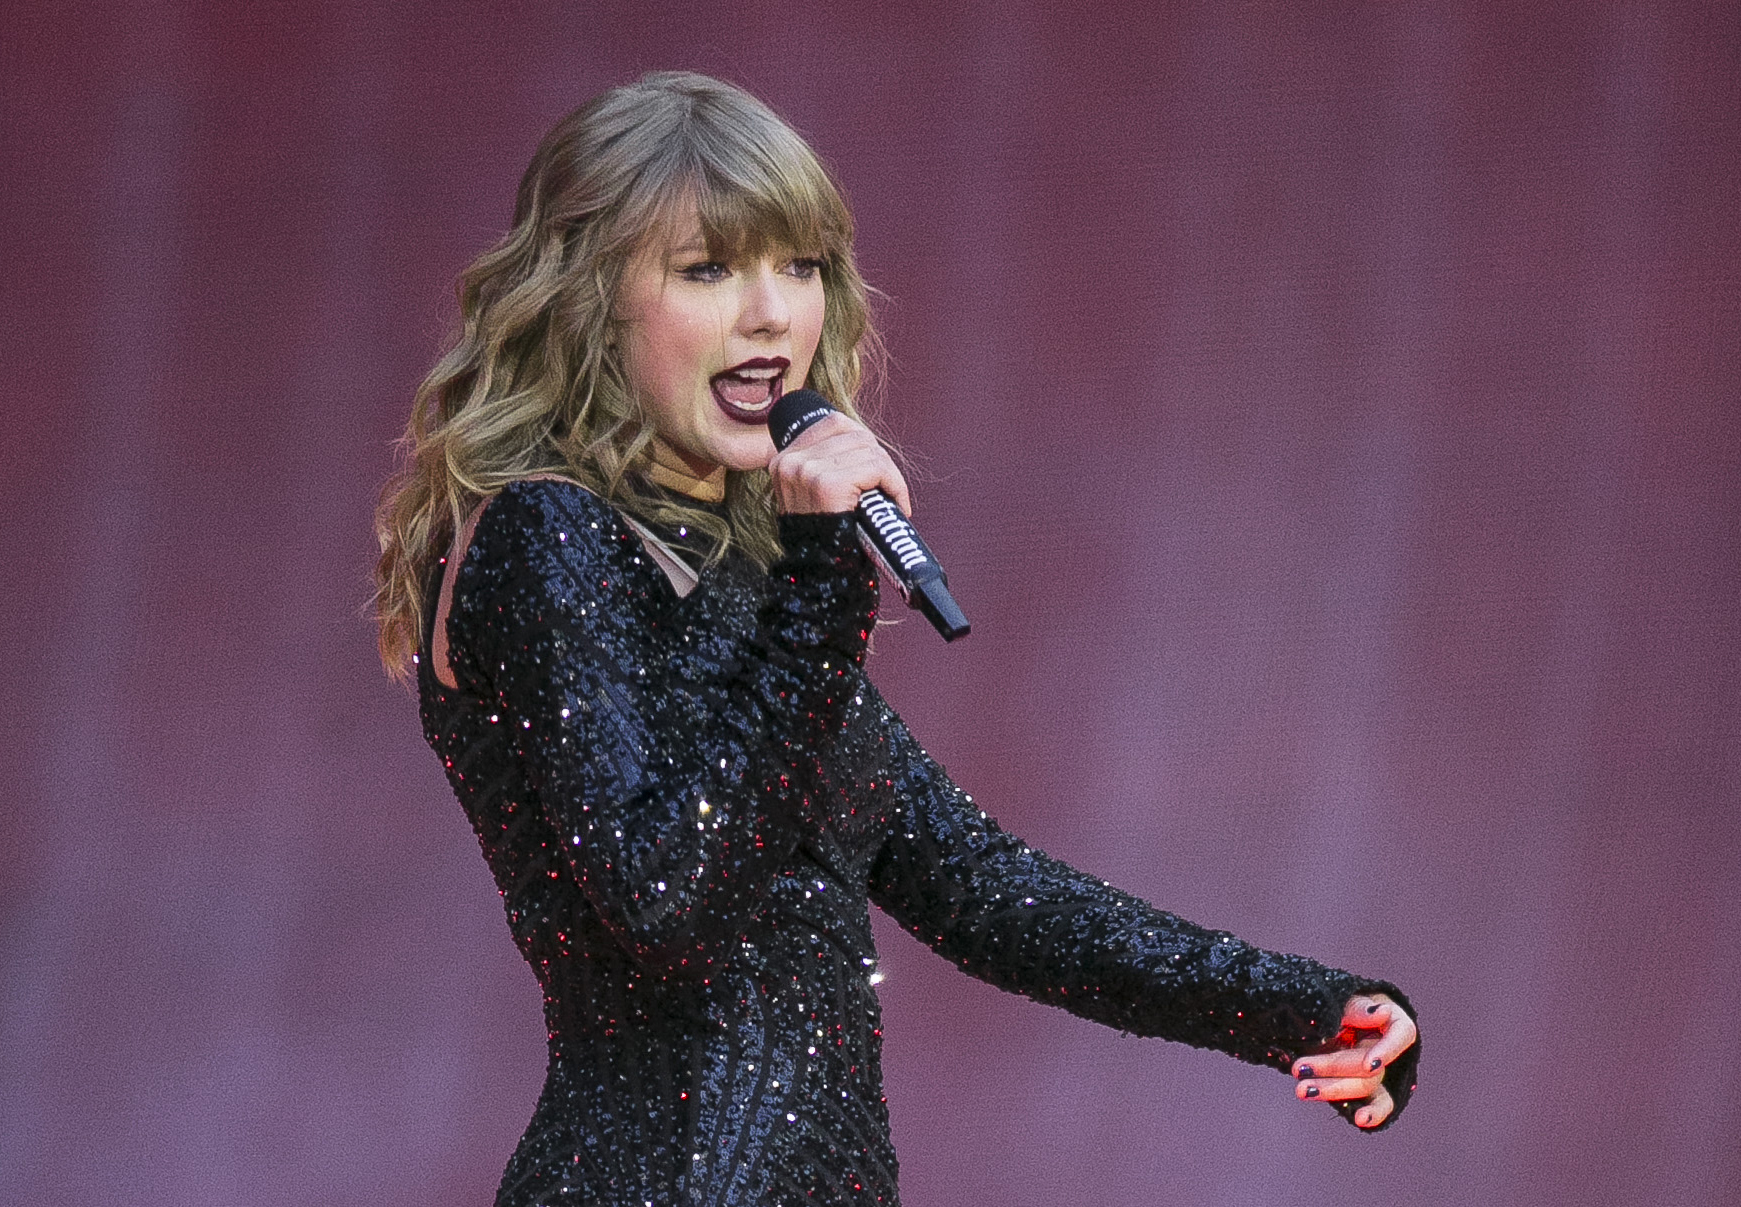 This is why we can have nice things: Taylor Swift's Reputation tour hits  Wembley Stadium